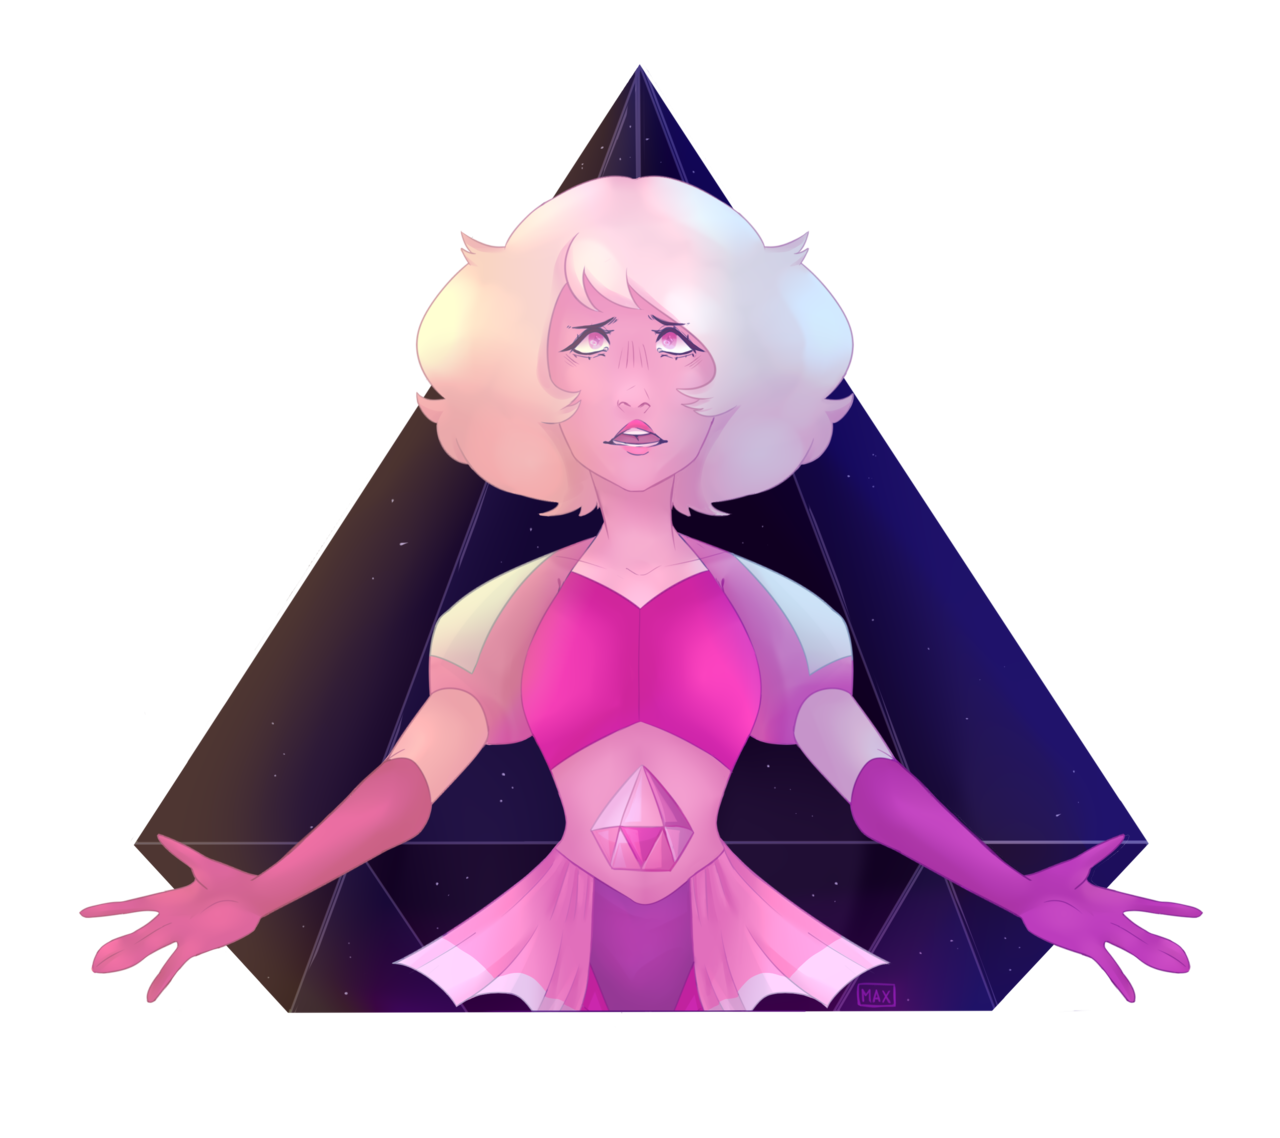 “She did everything she could as Pink Diamond, but her status meant nothing”